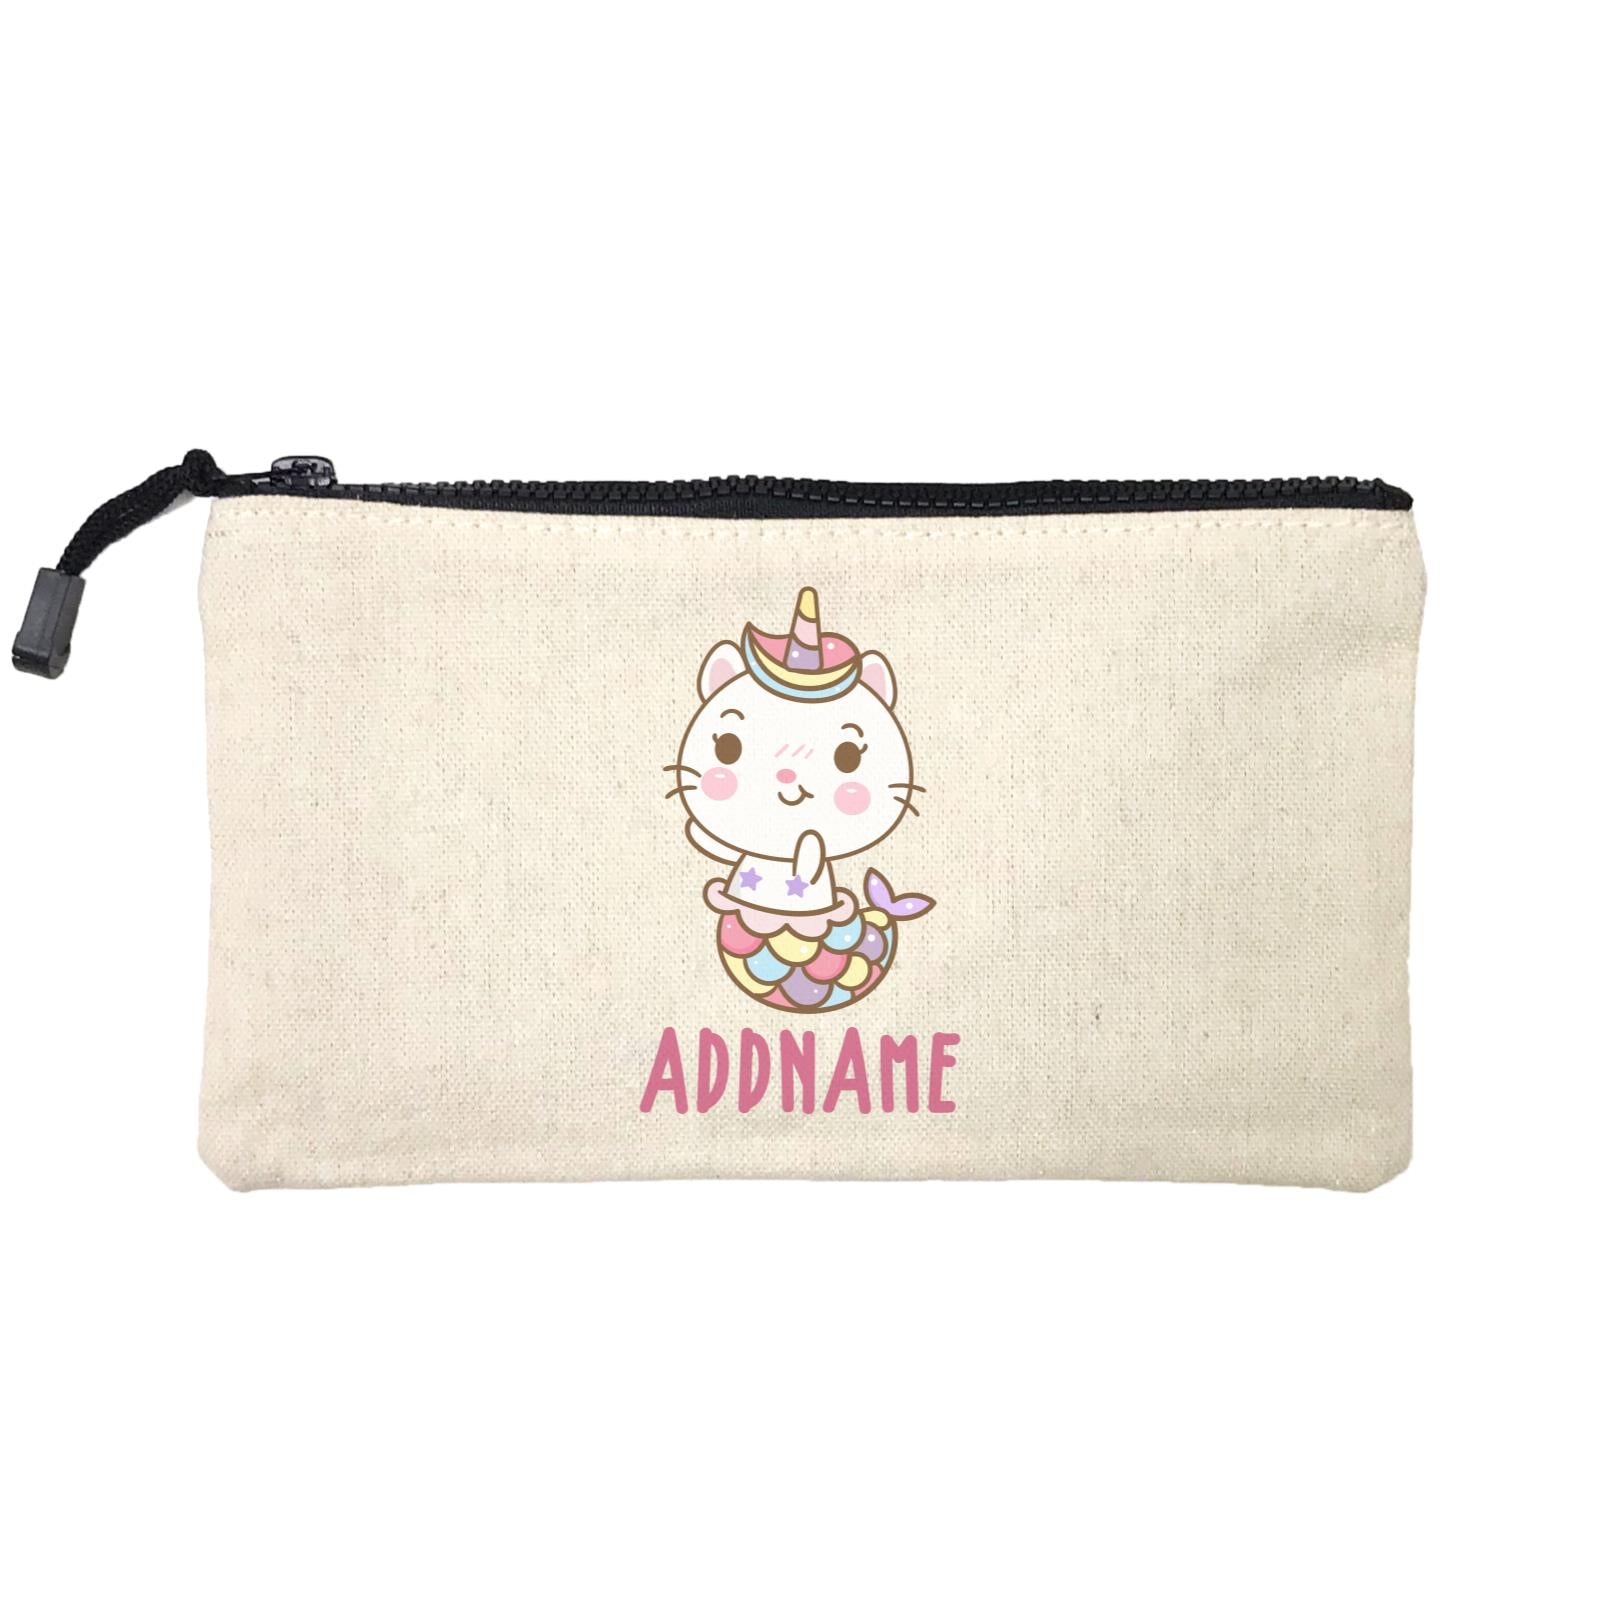 Unicorn And Princess Series Cute Cat Mermaid Addname Mini Accessories Stationery Pouch